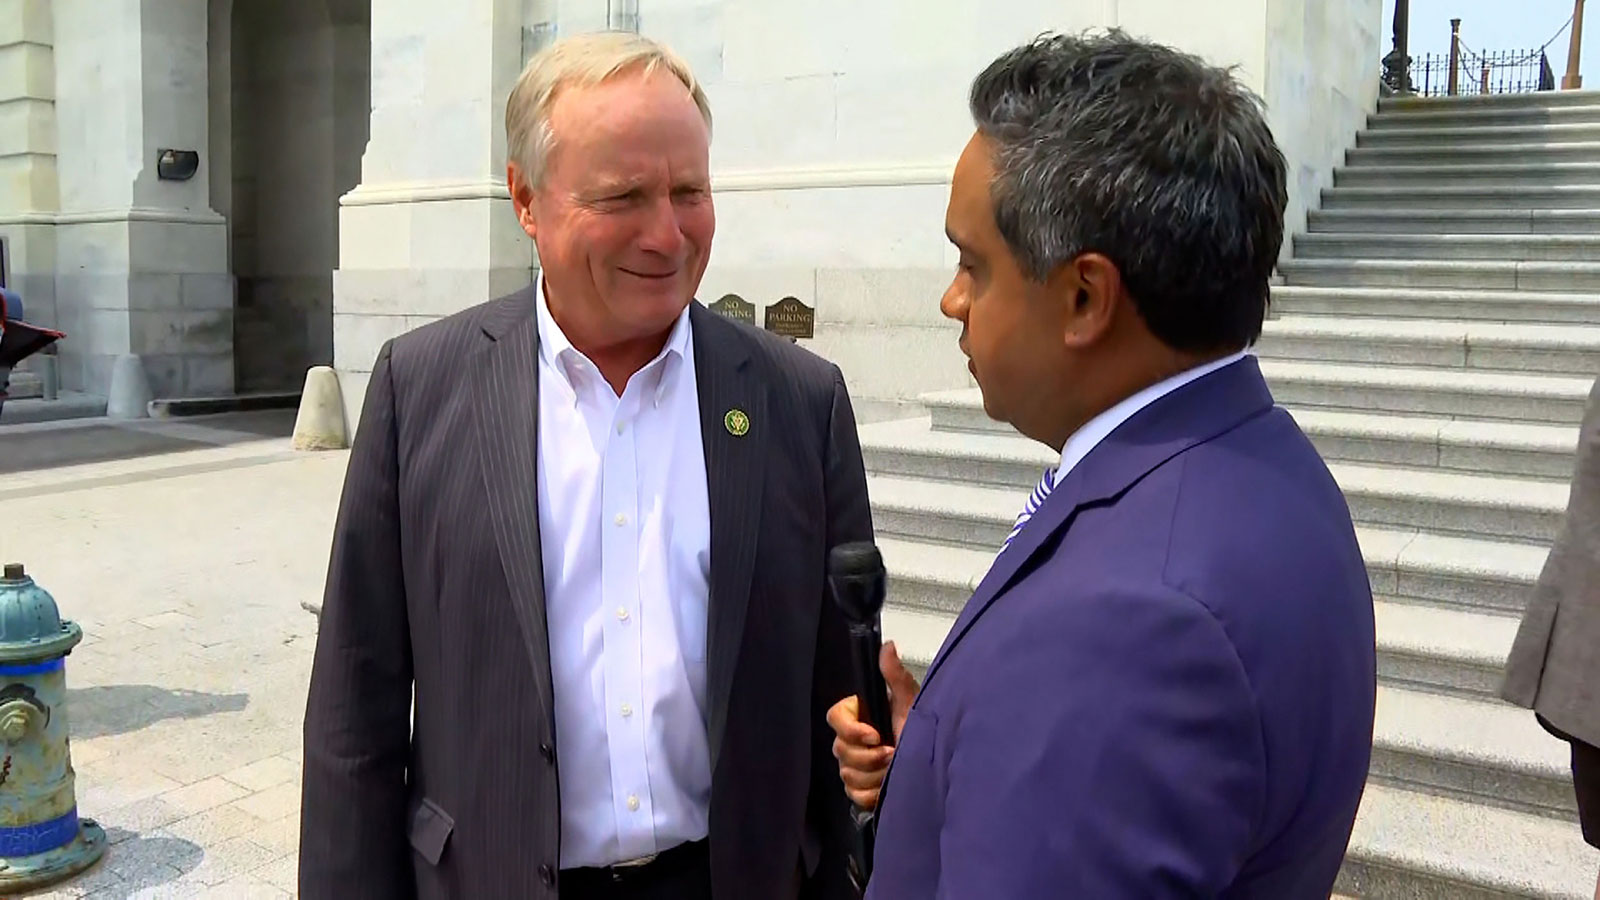 Rep. David Joyce discusses the debt ceiling negotiations on Tuesday.